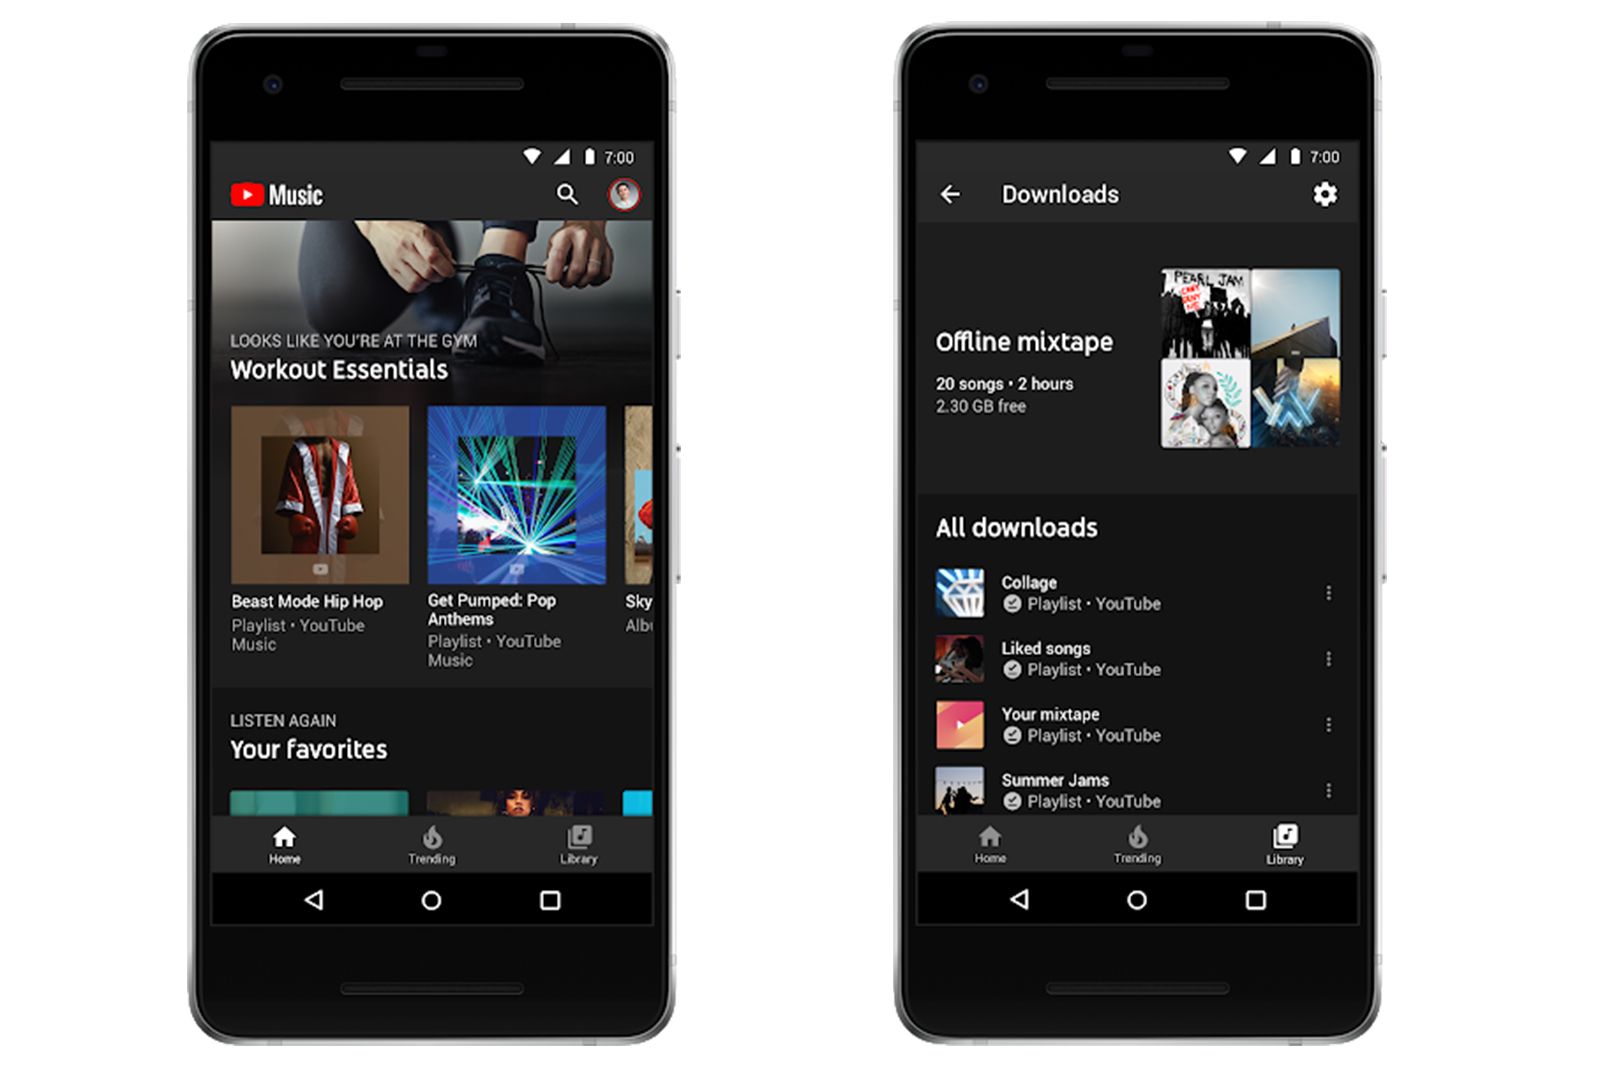 YouTube Music streaming service launches bringing together music and video image 1